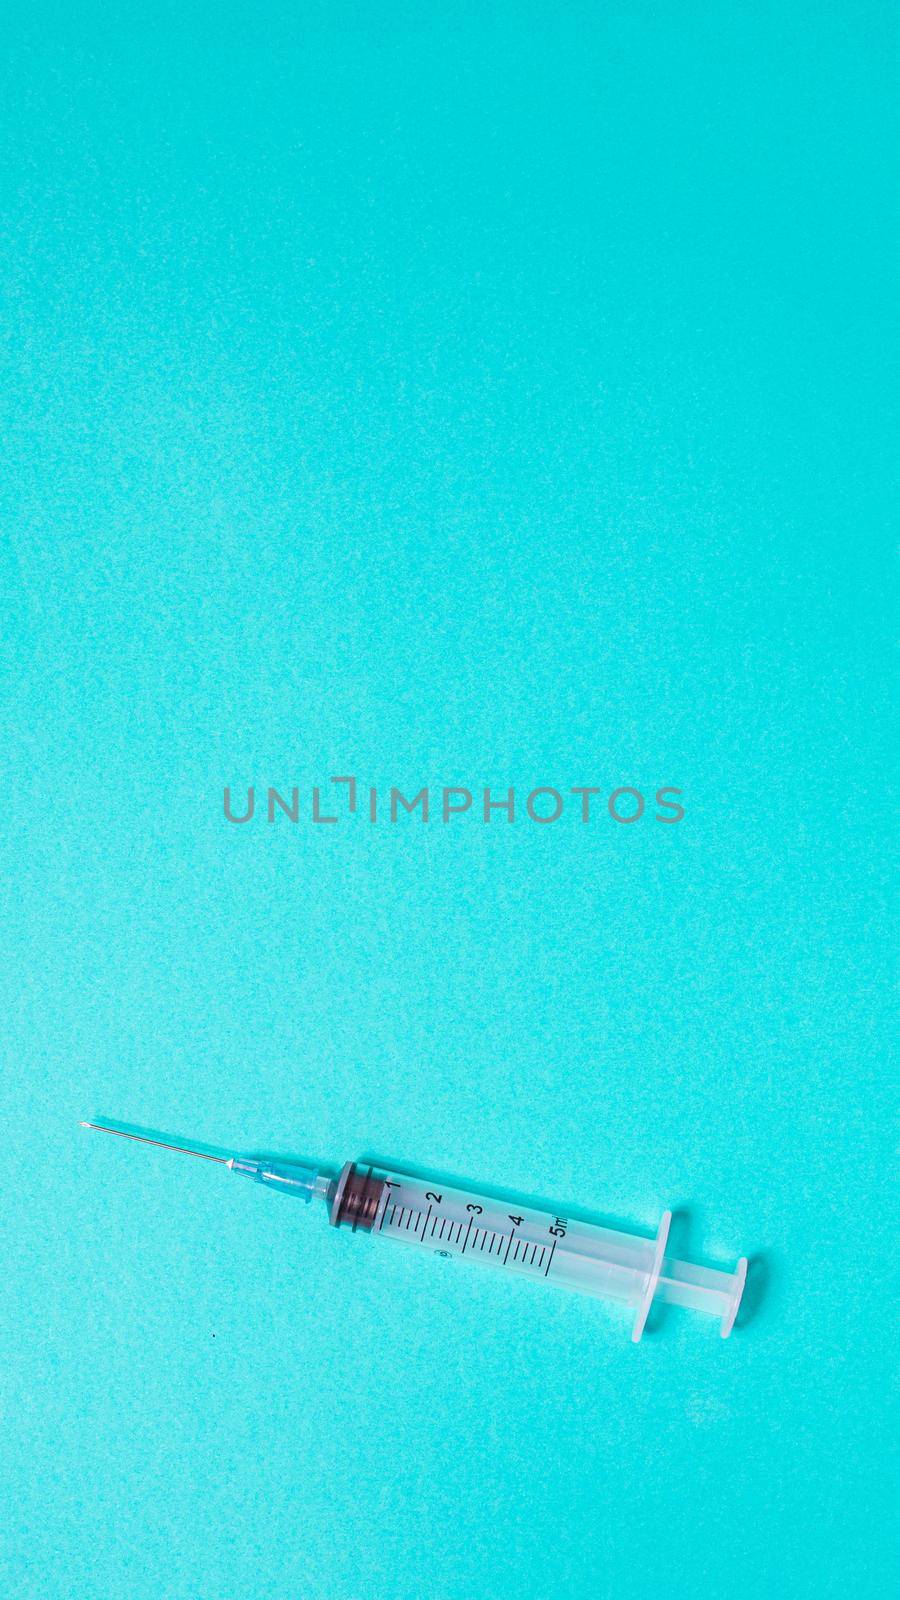 Syringe on pastel blue background from above by Ciorba